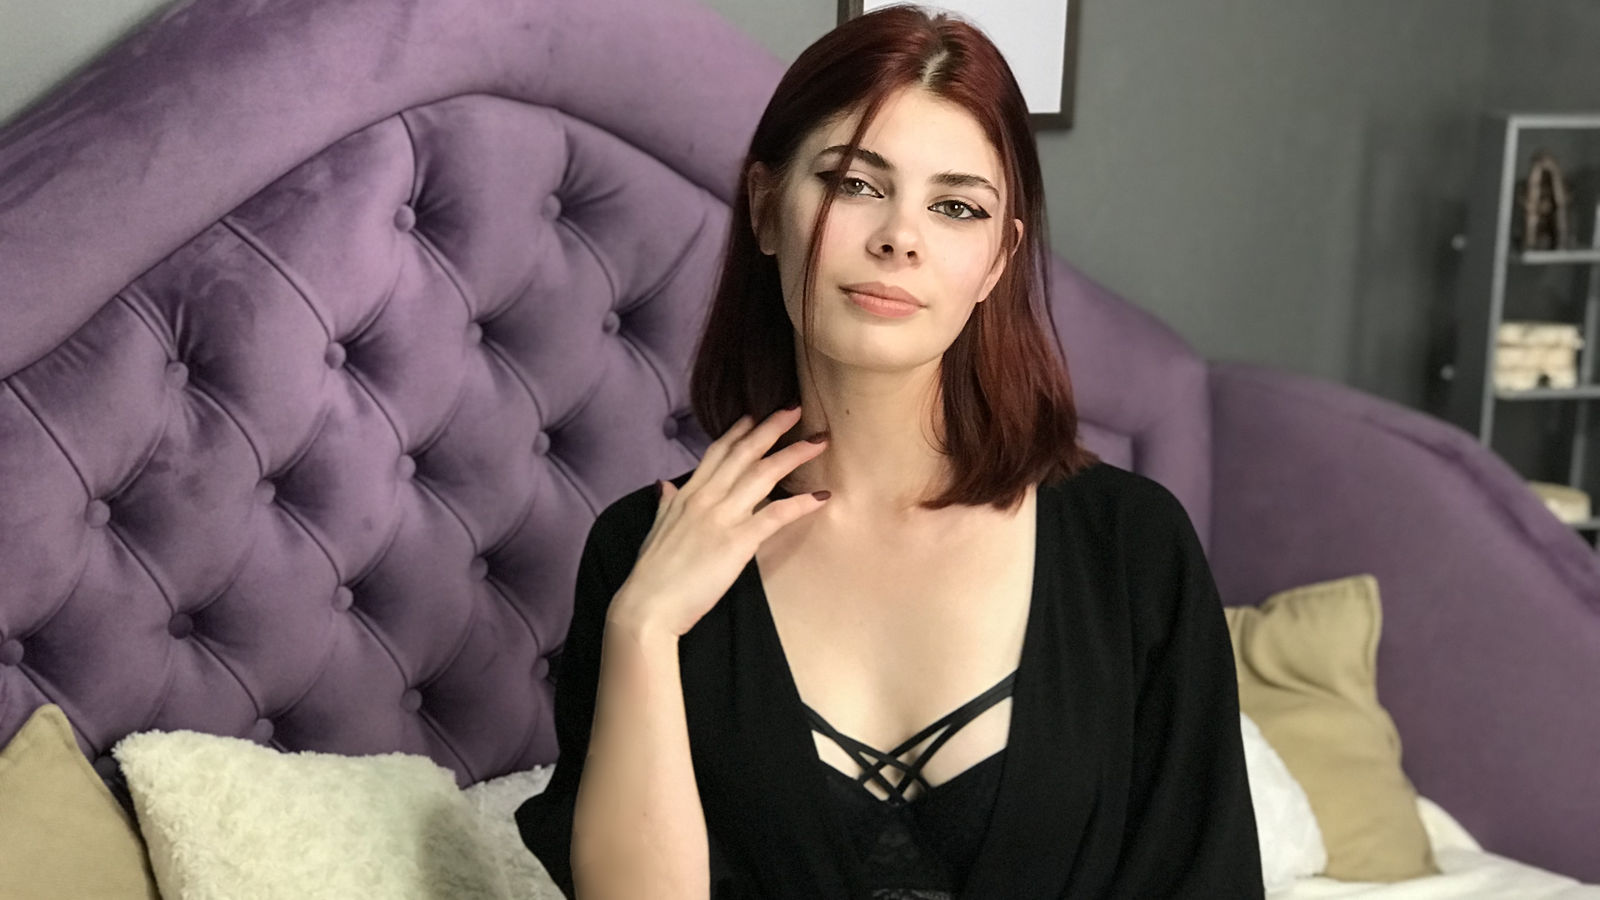 Porn Chat Live with MonikaFord